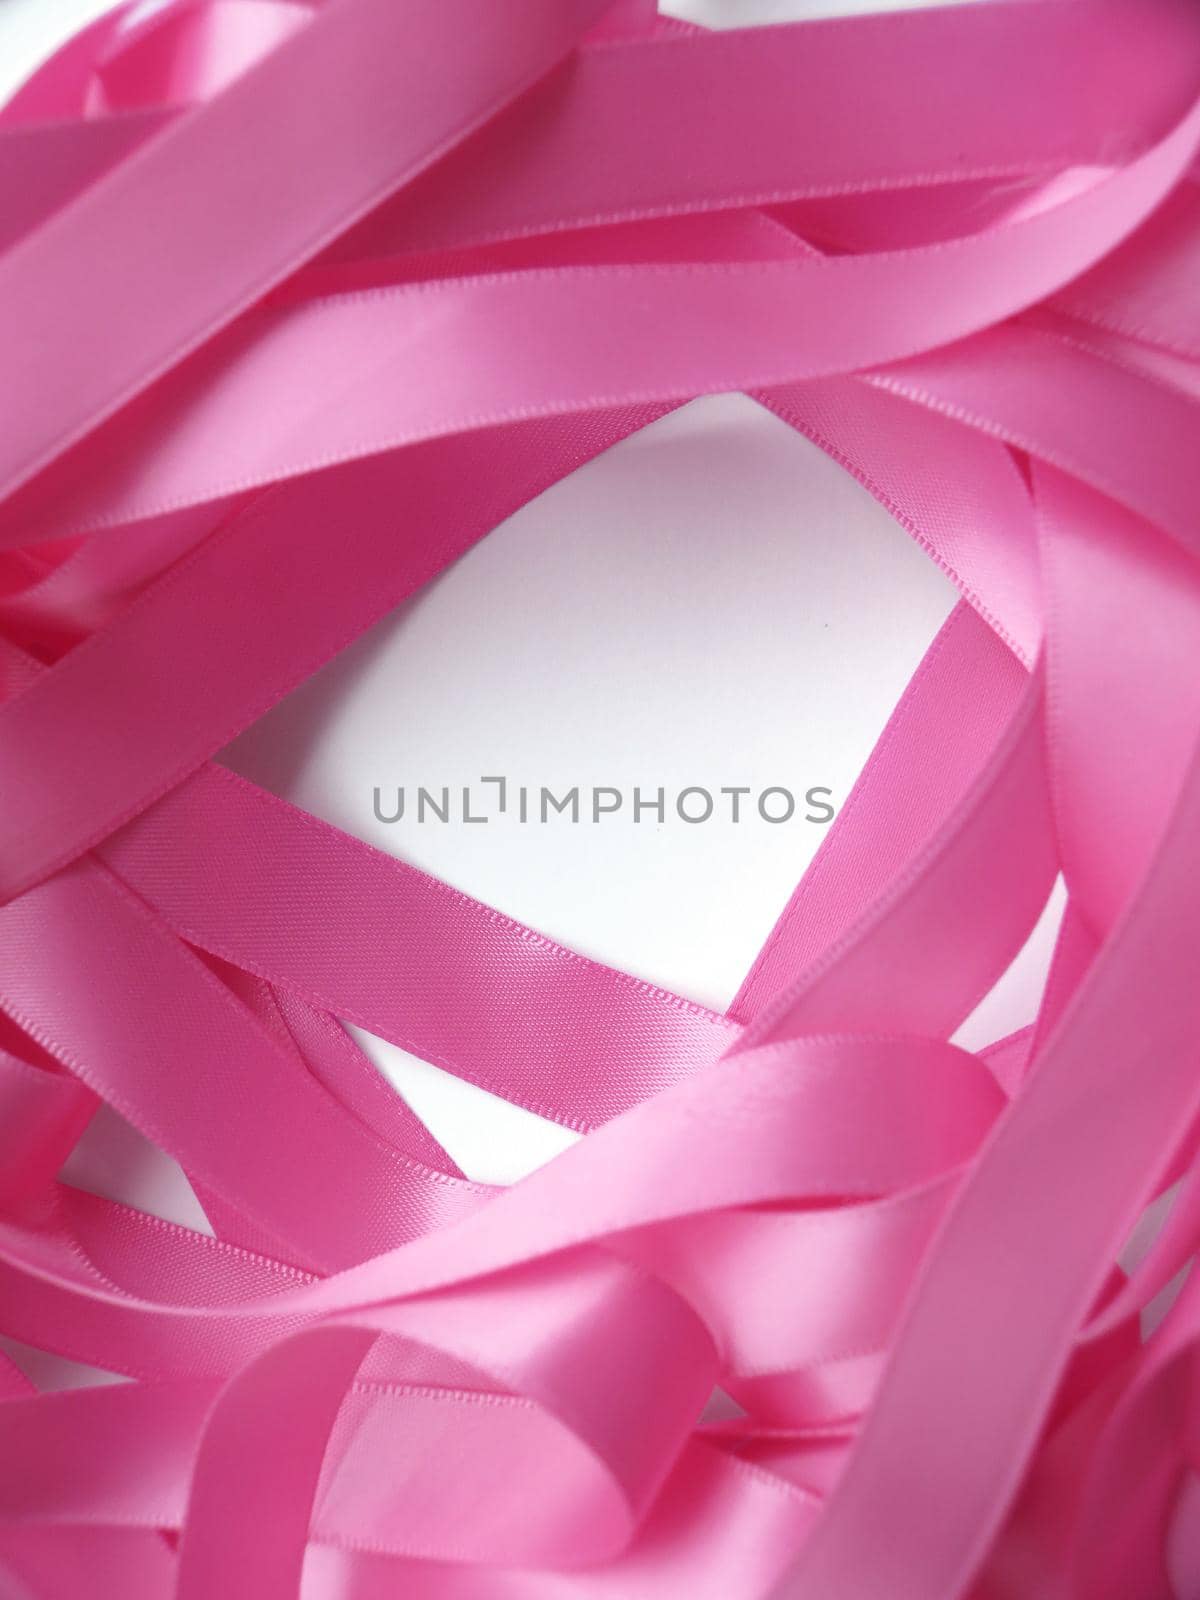 Pink ribbon over white background, design element by aroas